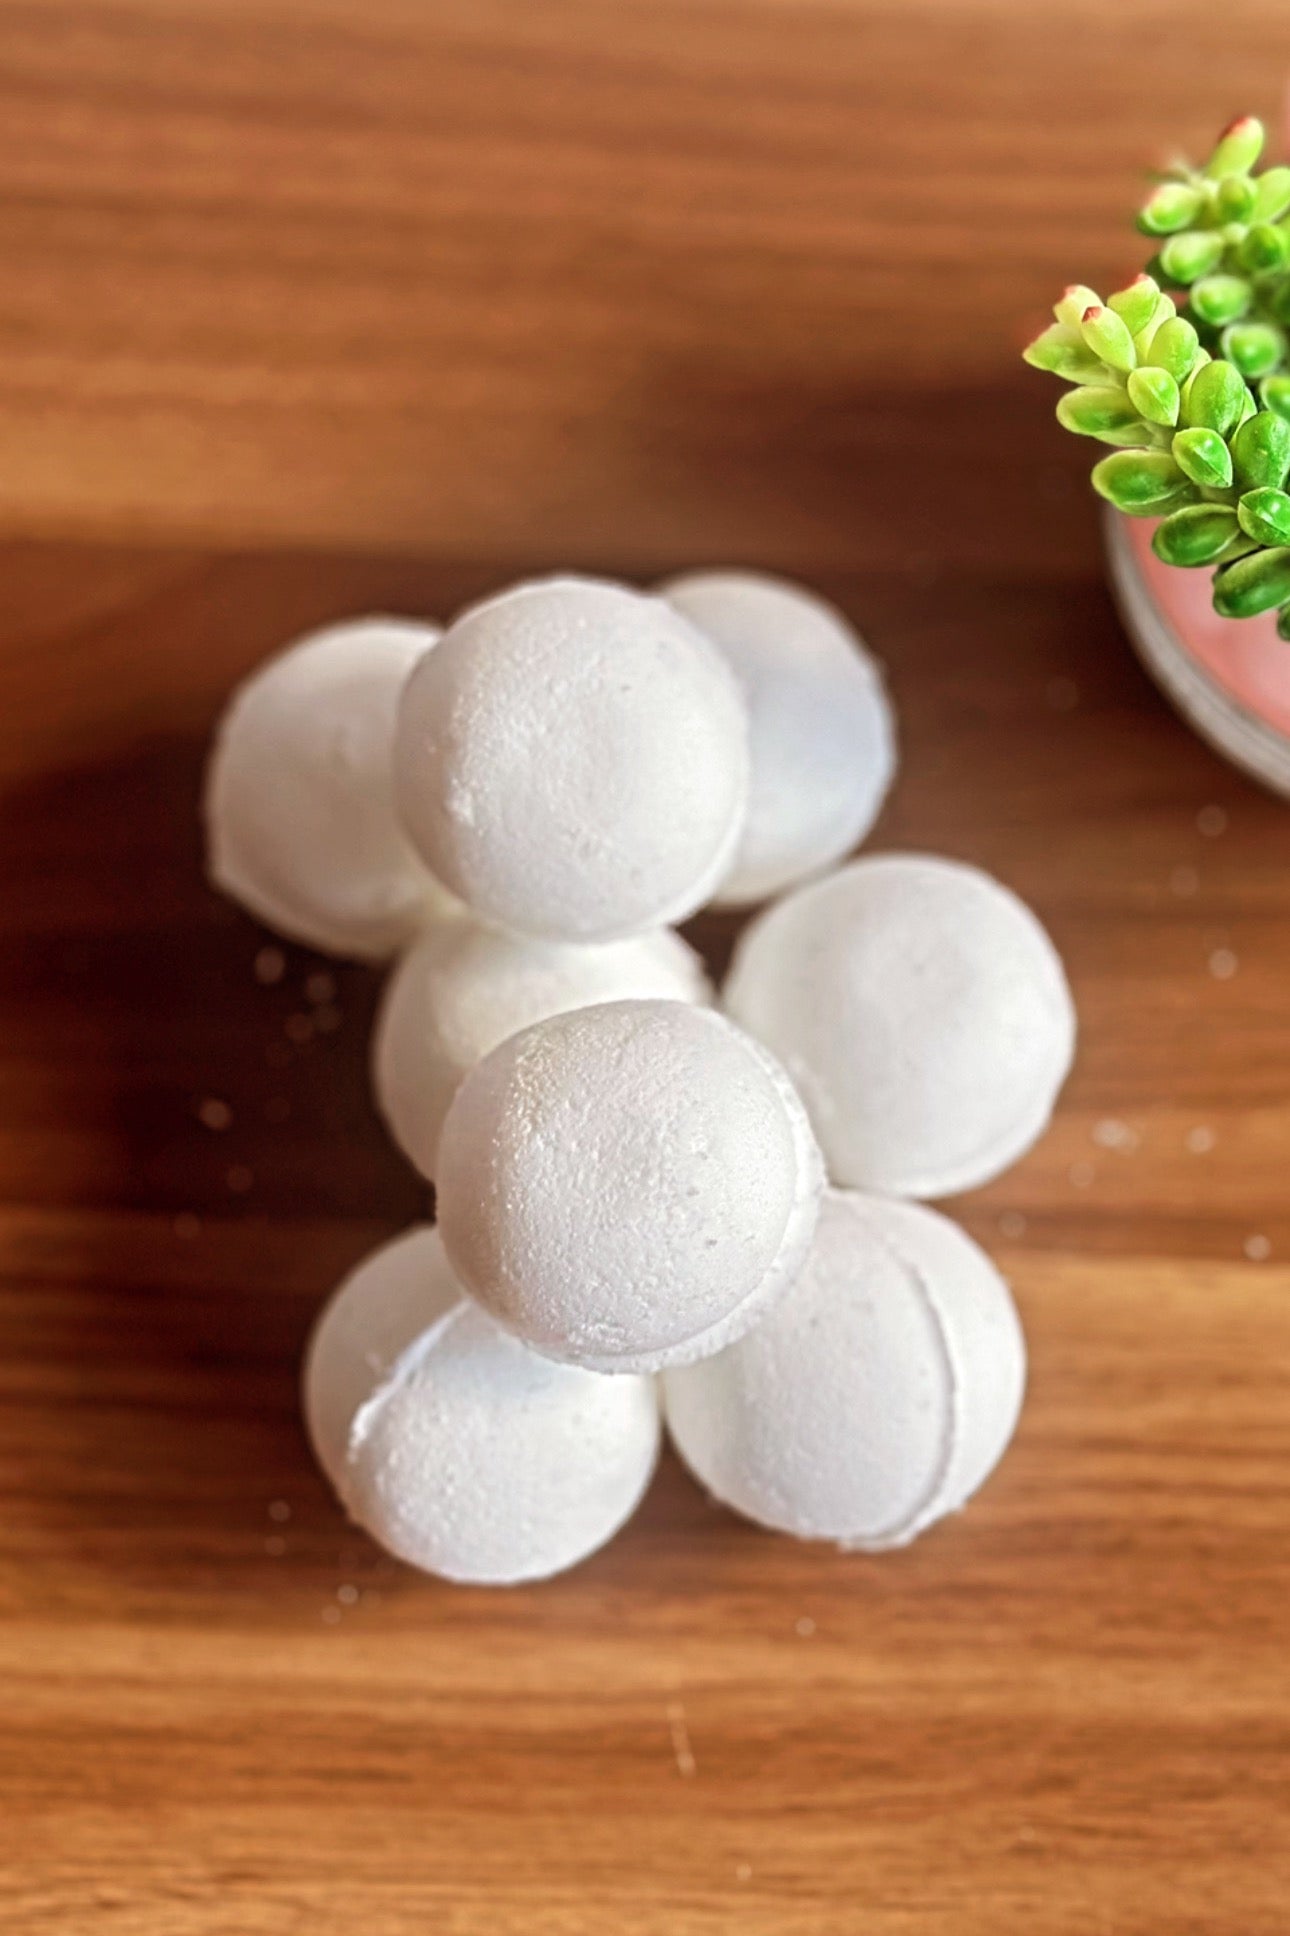 Peppermint Natural Toilet Tablets/Pods Cleaner